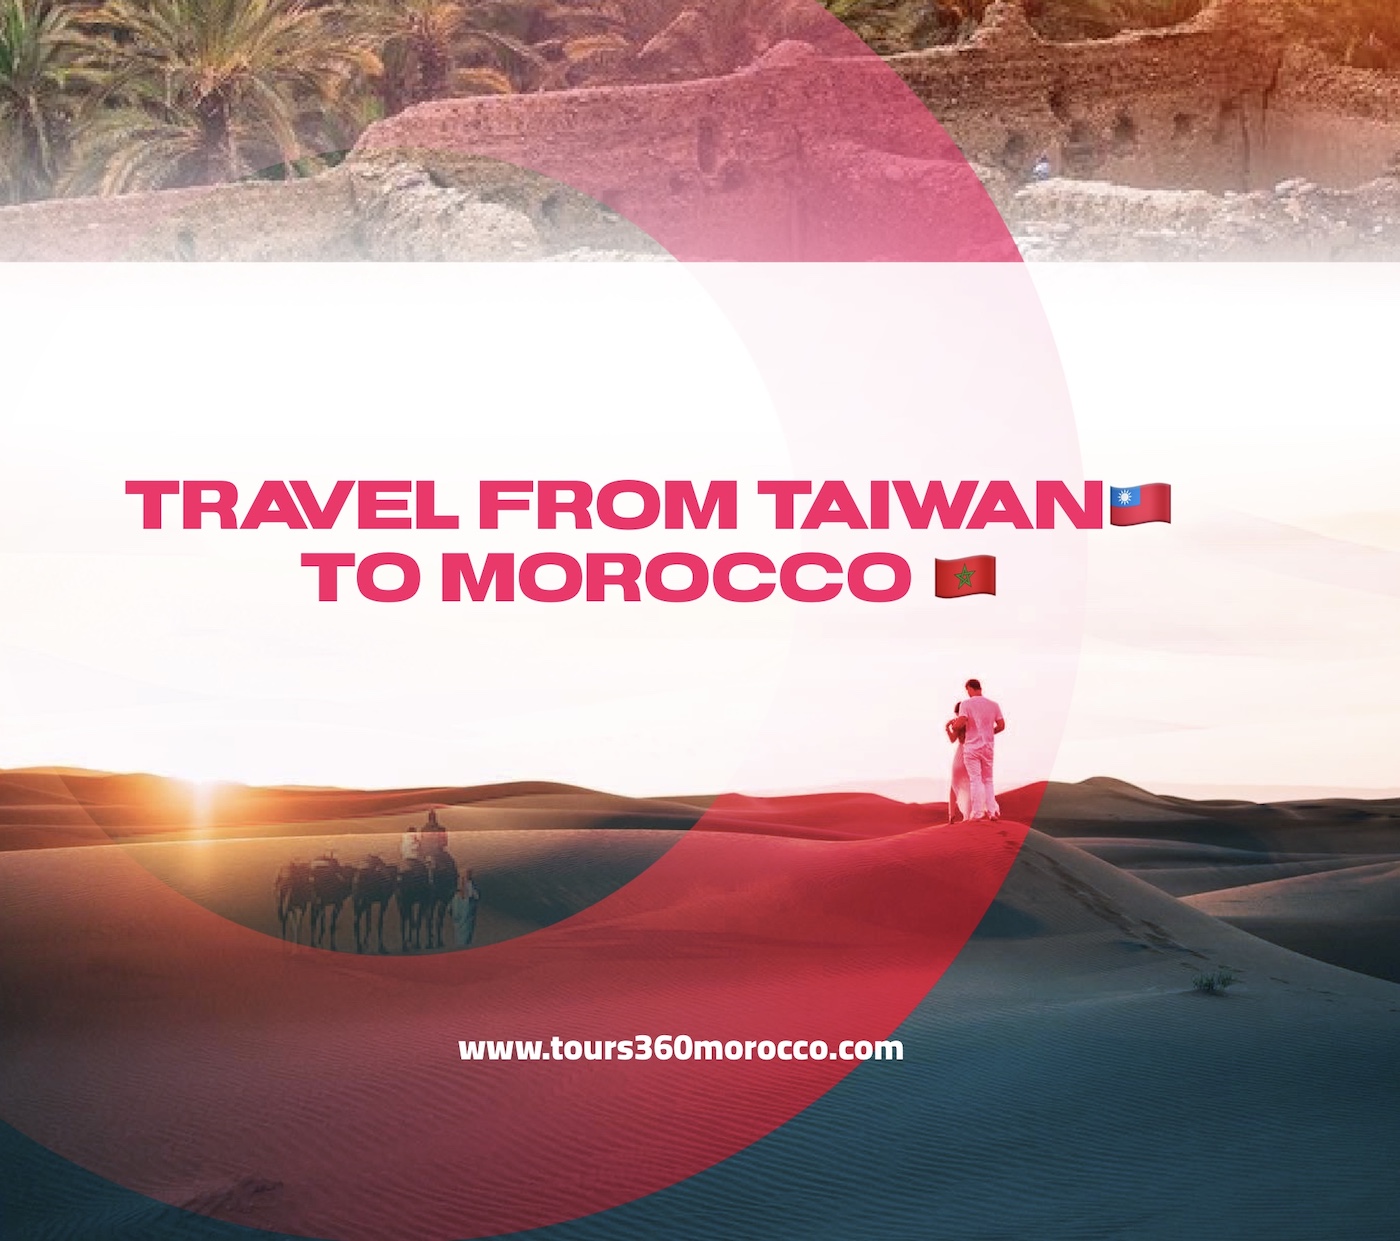 Travel from Taiwan to Morocco